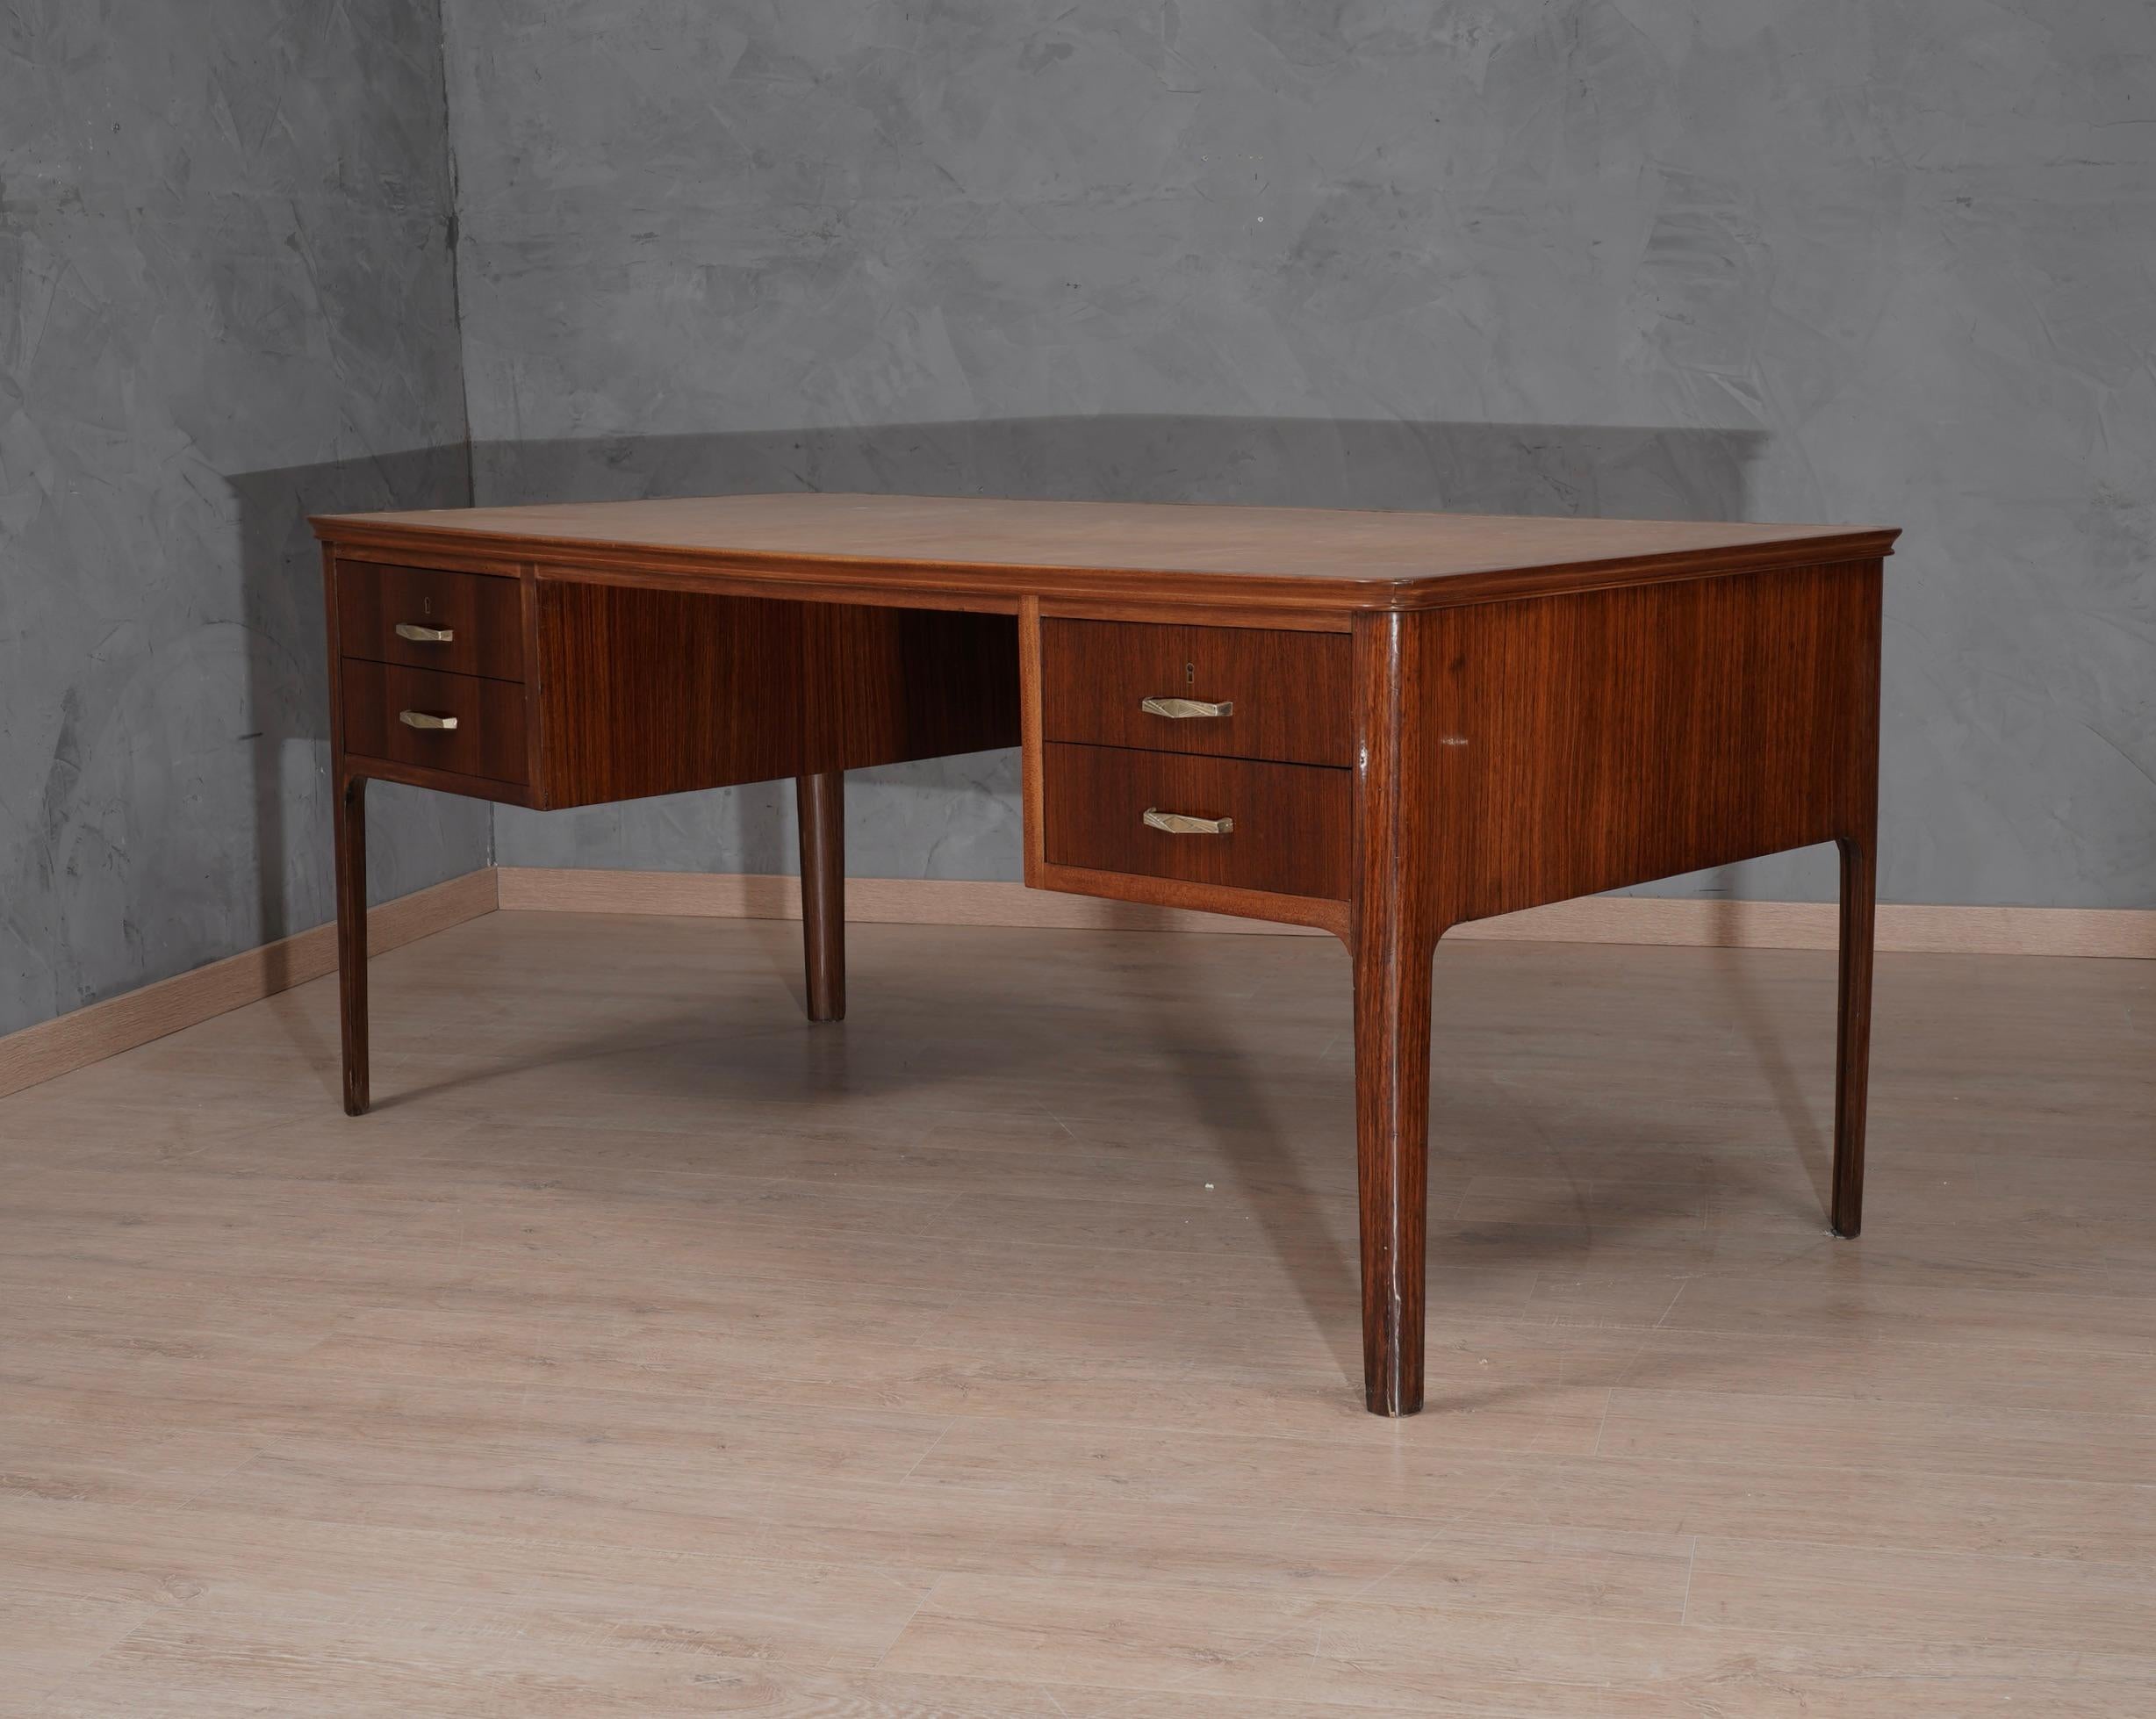 Midcentury Walnut and Leather Italian Writing Desk, 1950 For Sale 7